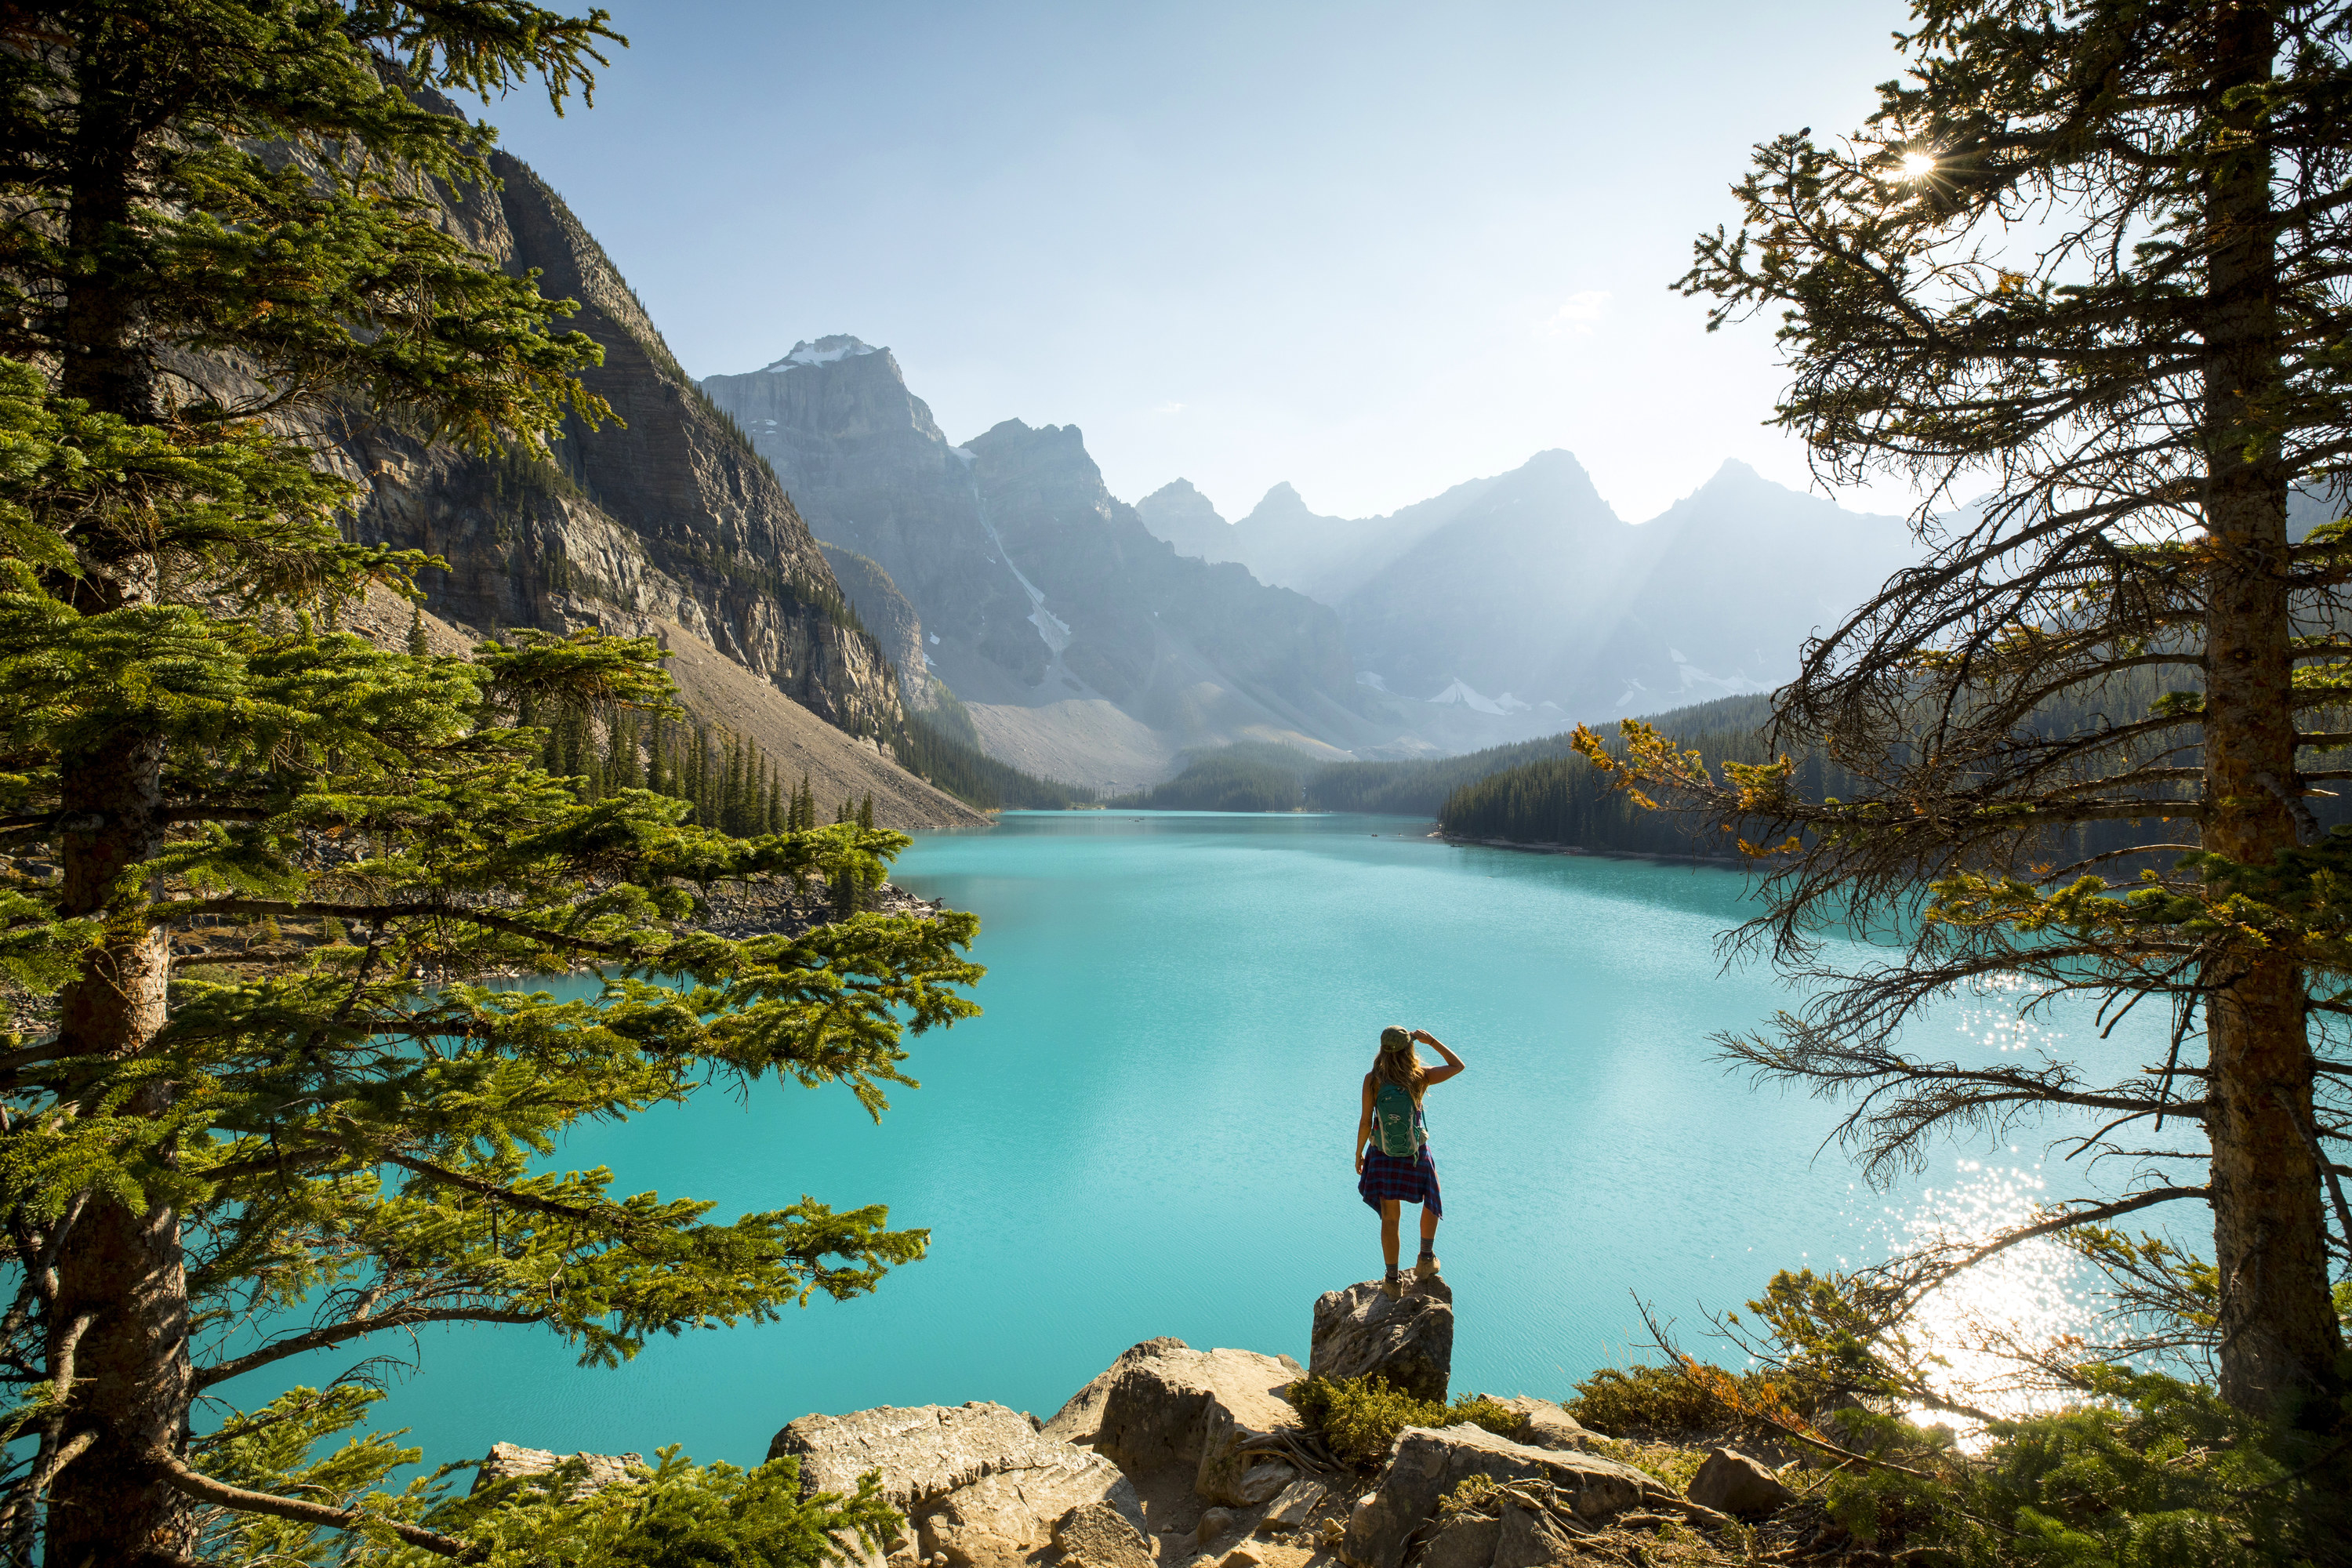 Person standing in front of a lake in front of mountains.